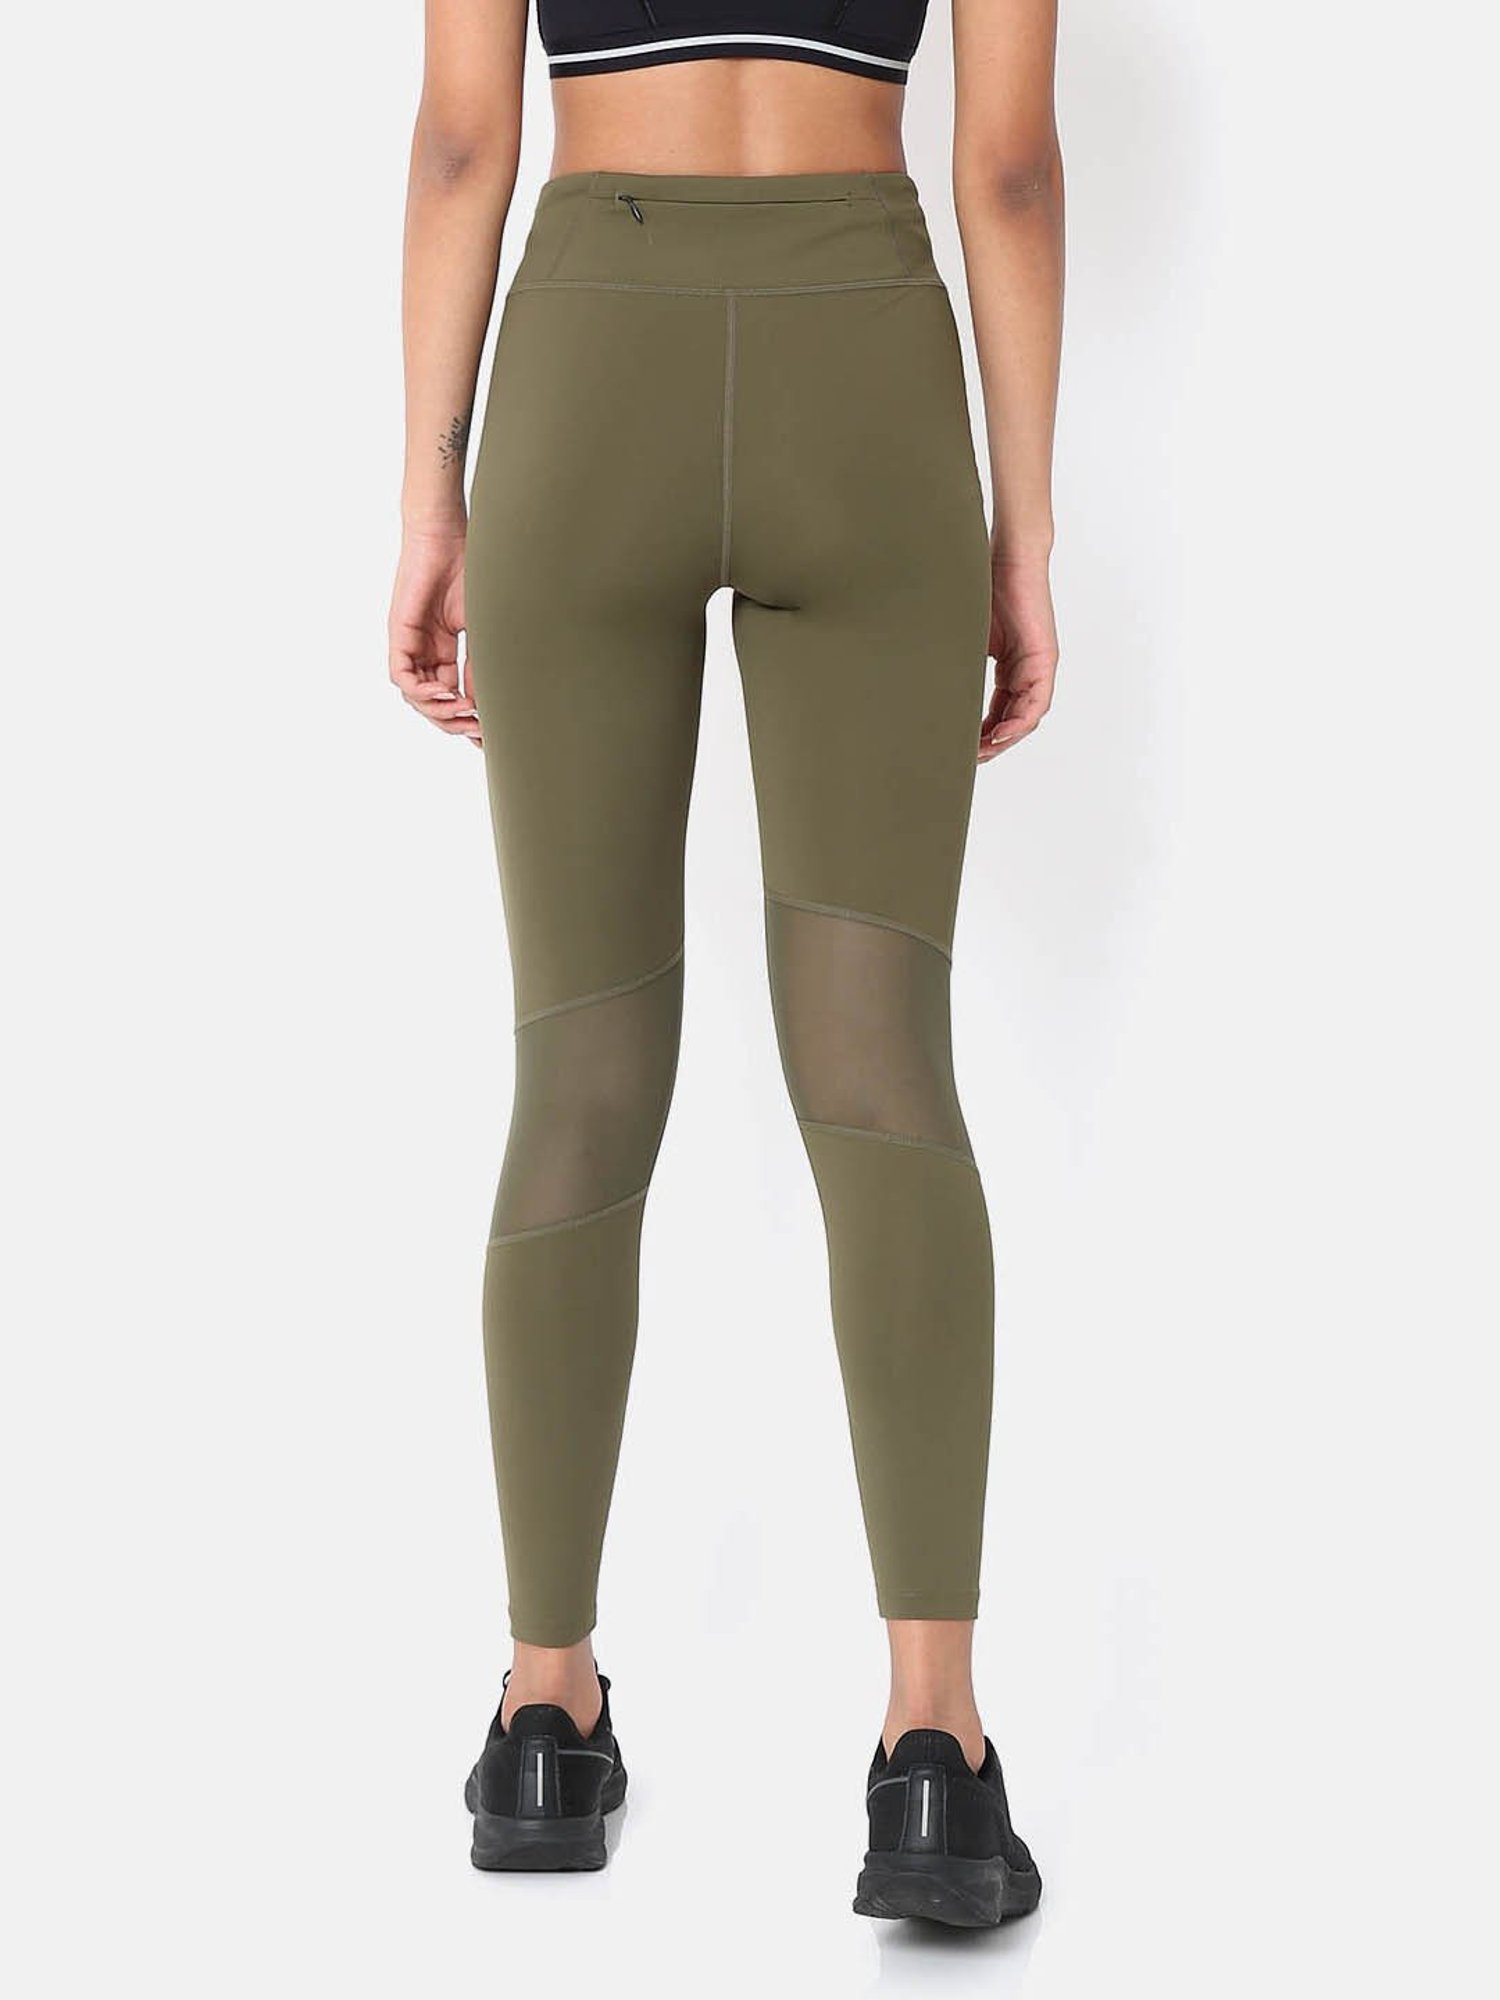 Buy Cultsport Absolute fit Mesh Tights for Women Online @ Tata CLiQ